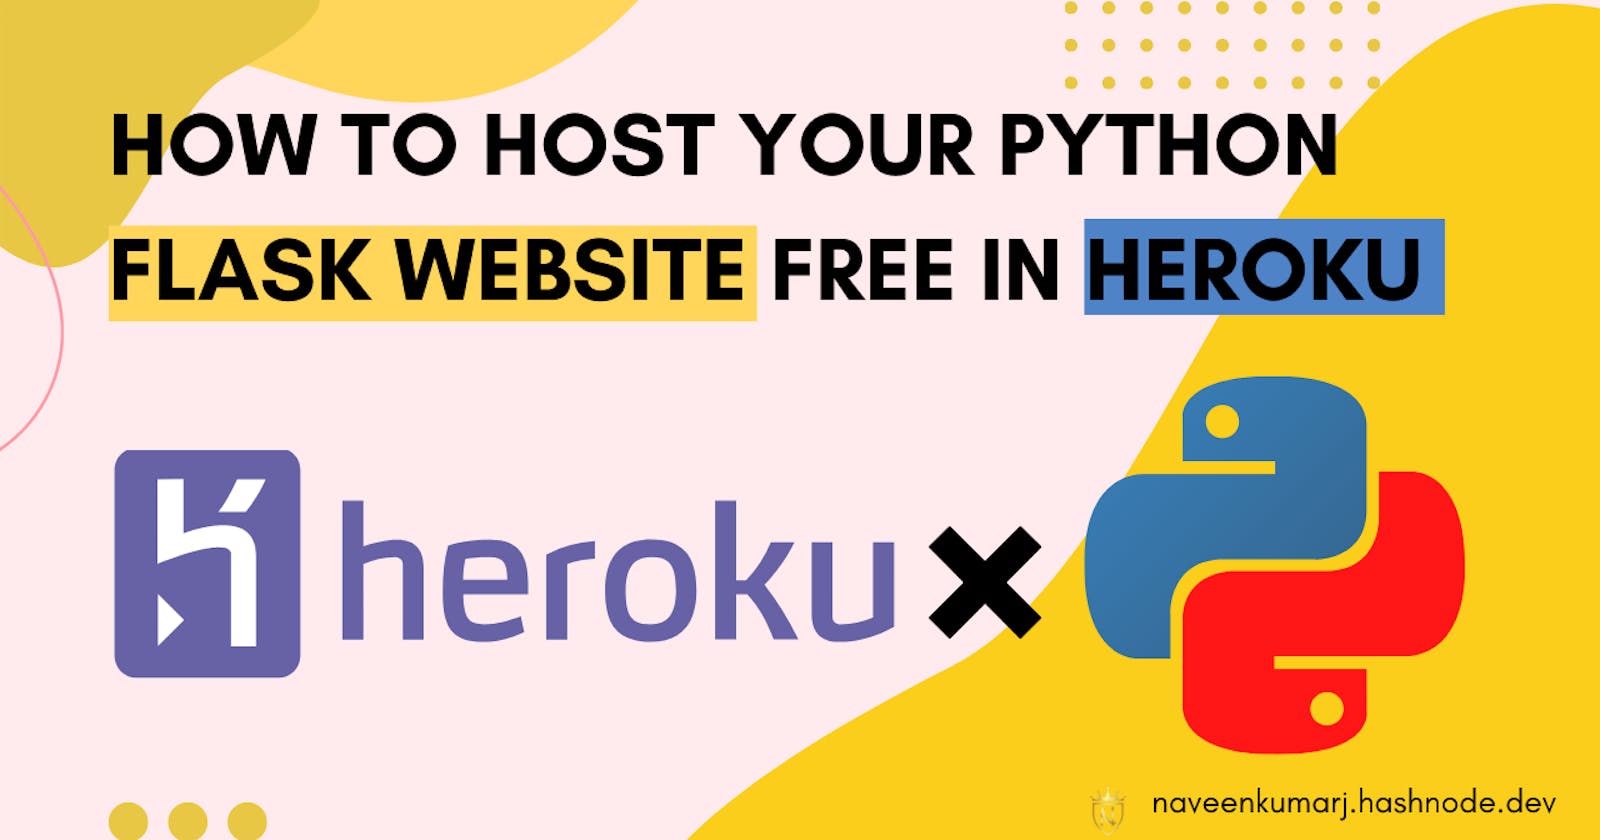 🔥 How to host your python flask website free in Heroku 🔥